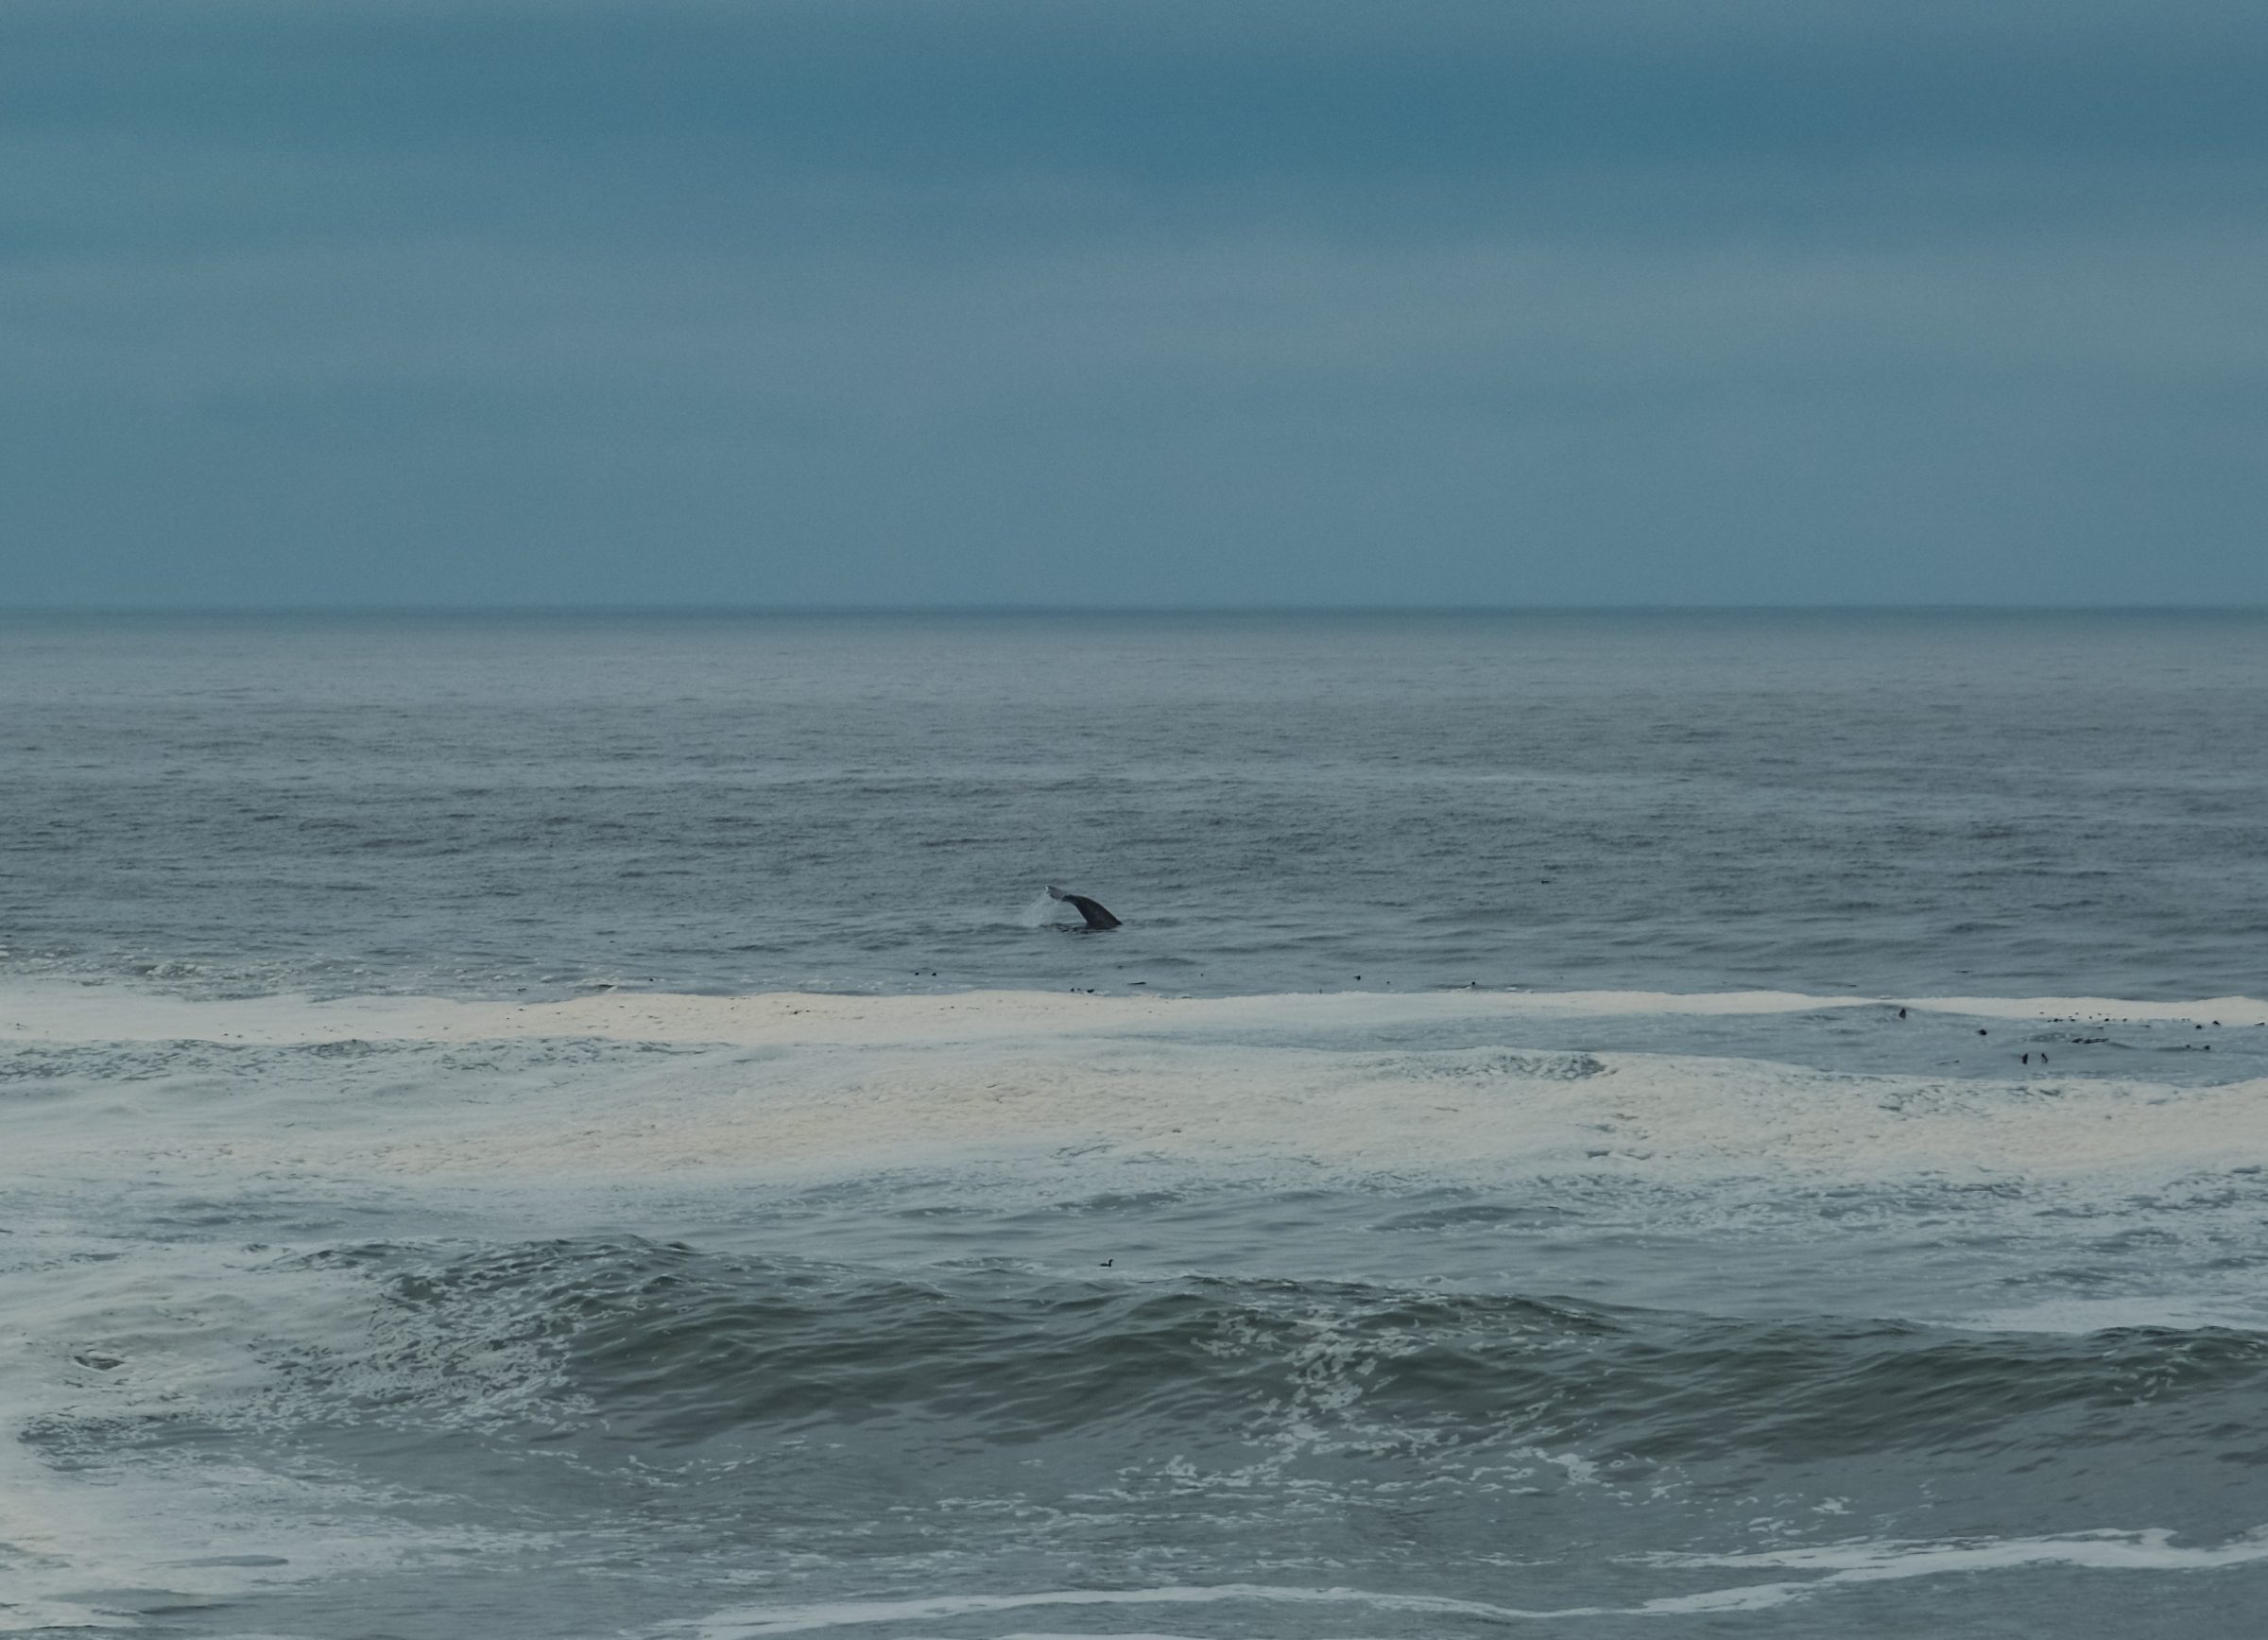 The Tail of a Whale in Washington State on America's West Coast